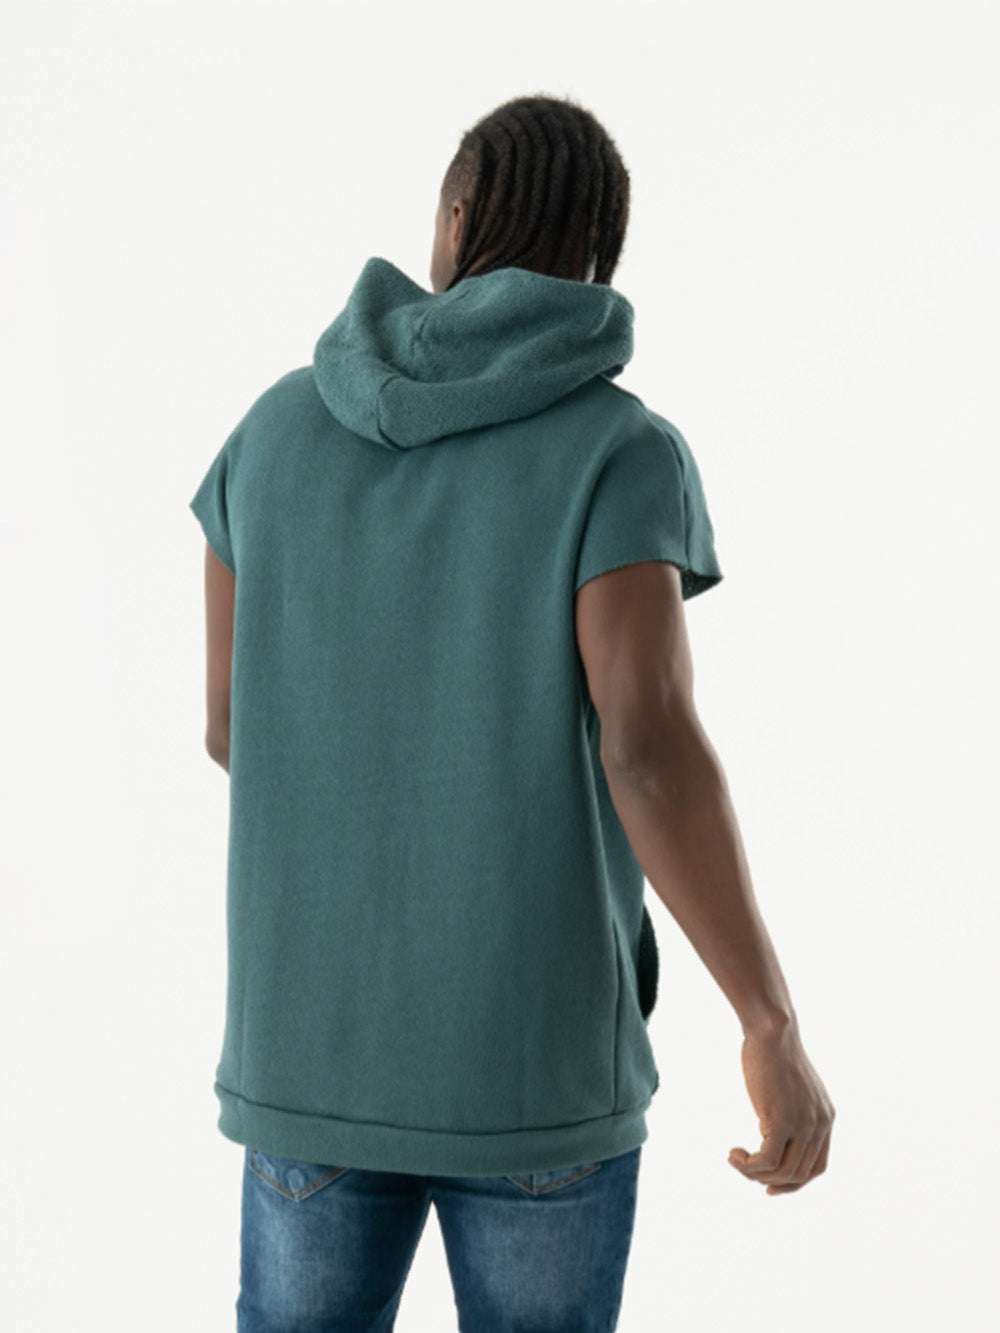 The back of a man wearing a BACHELOR HOODIE | GREEN.